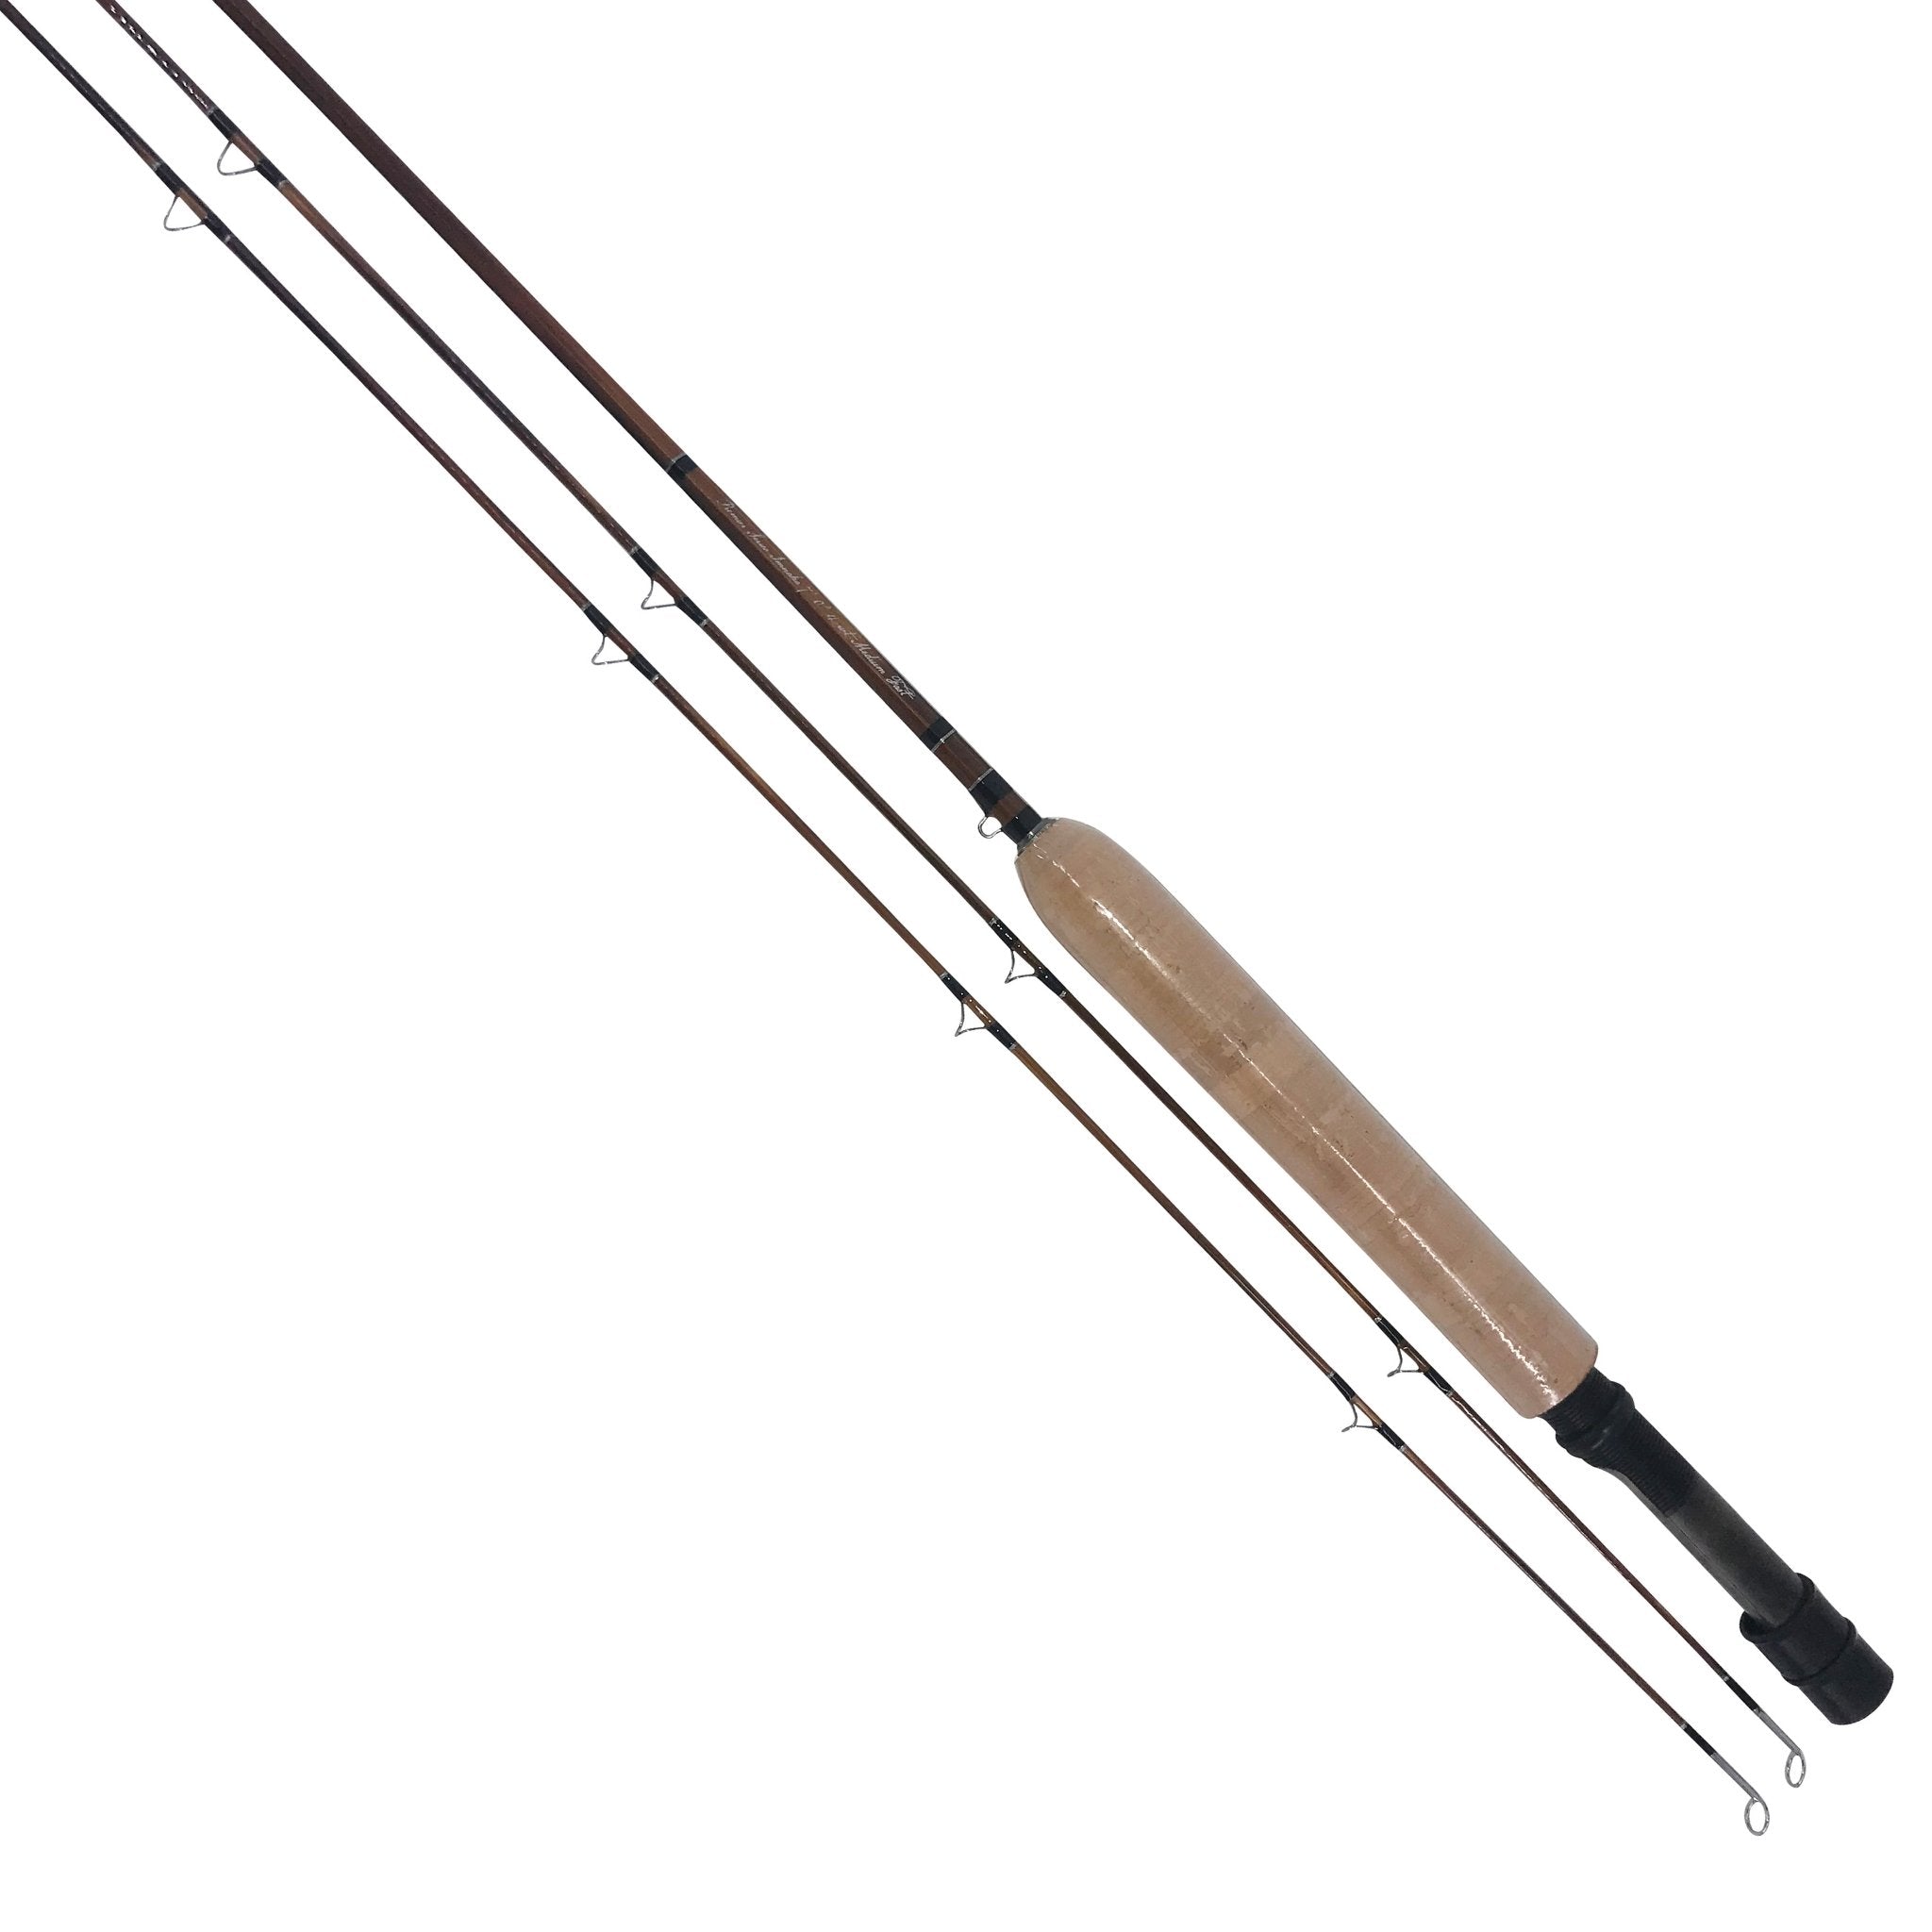 Premier Gallatin 7' 6 4-wt Medium Action Bamboo Fly Rod - Headwaters Bamboo